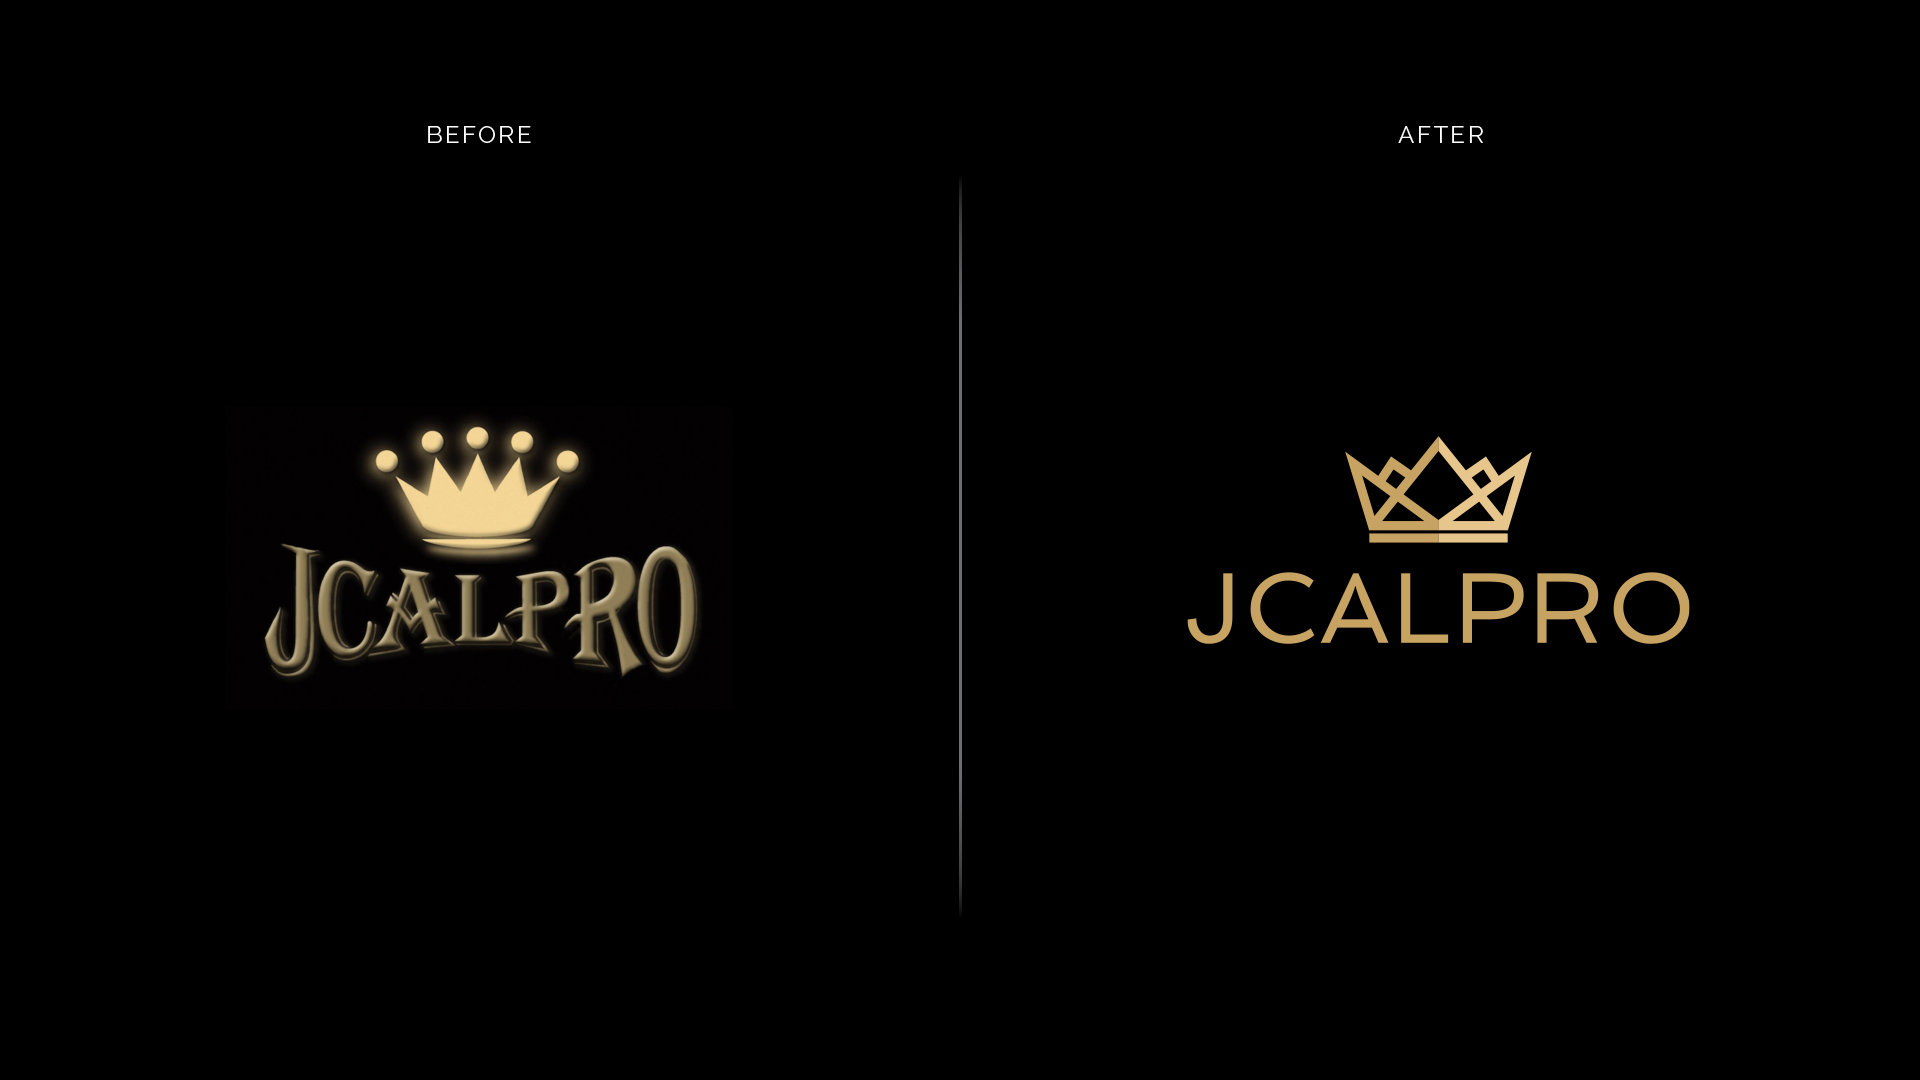 Before-After_logos-2-1.jpg